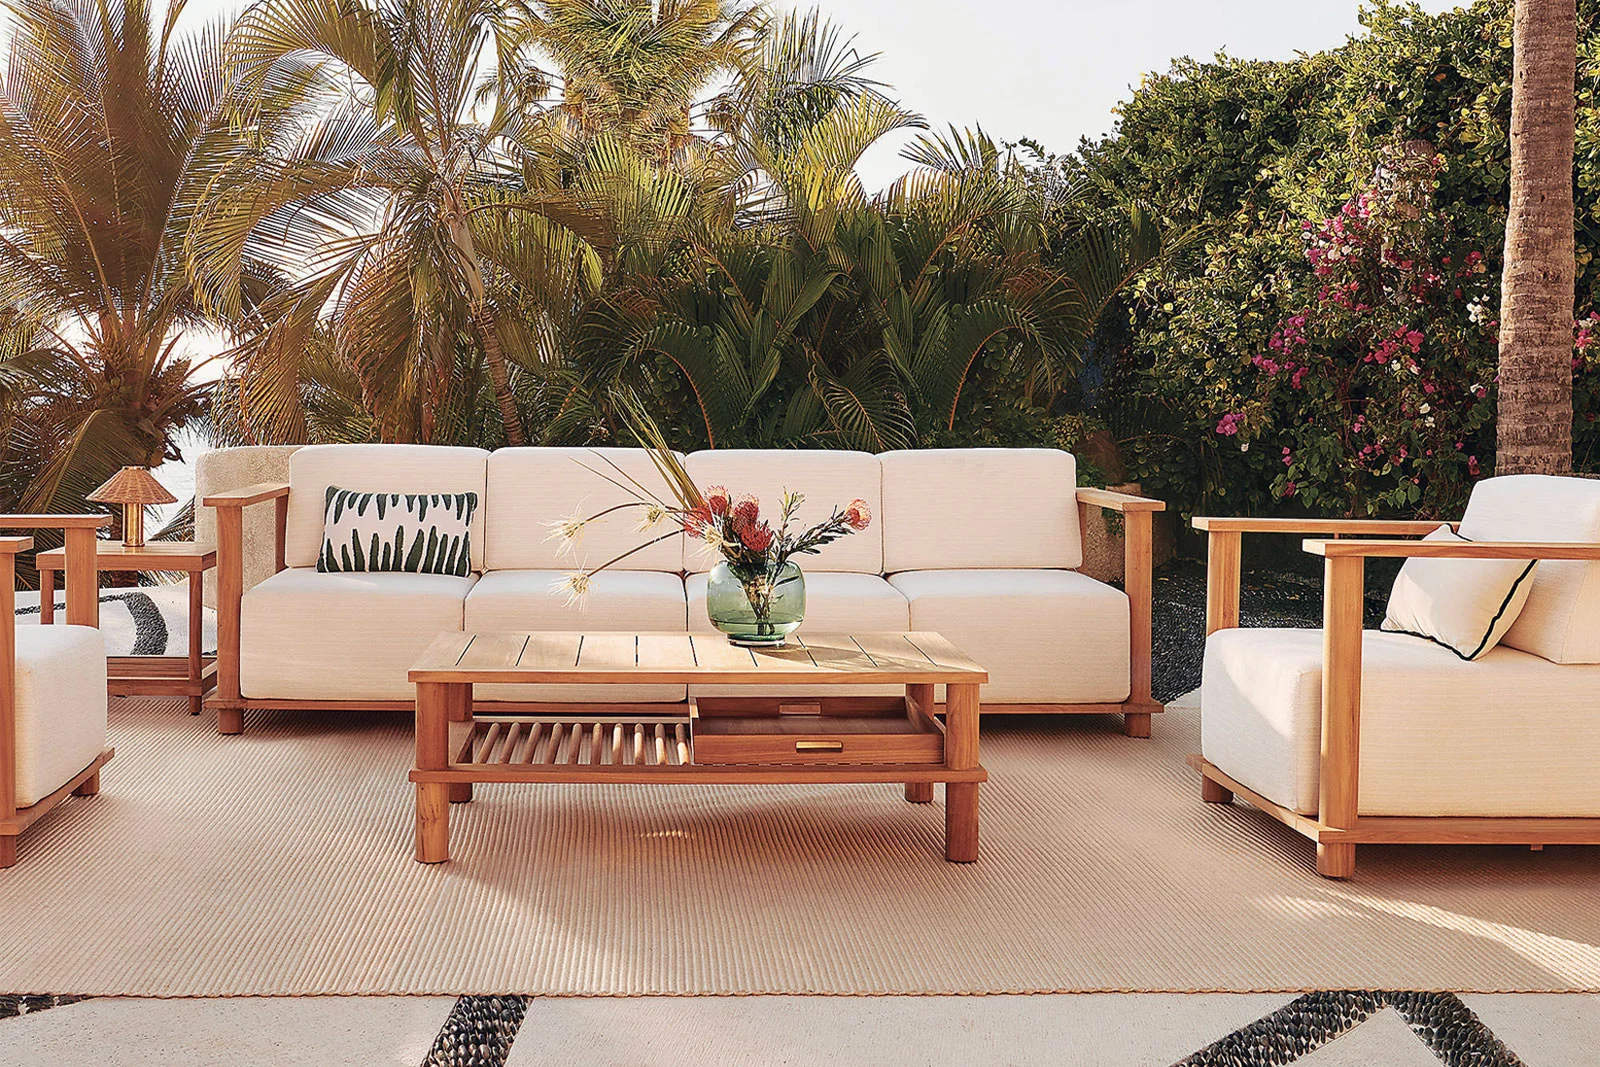 deck furniture ideas, teak wood in paradise with palm trees